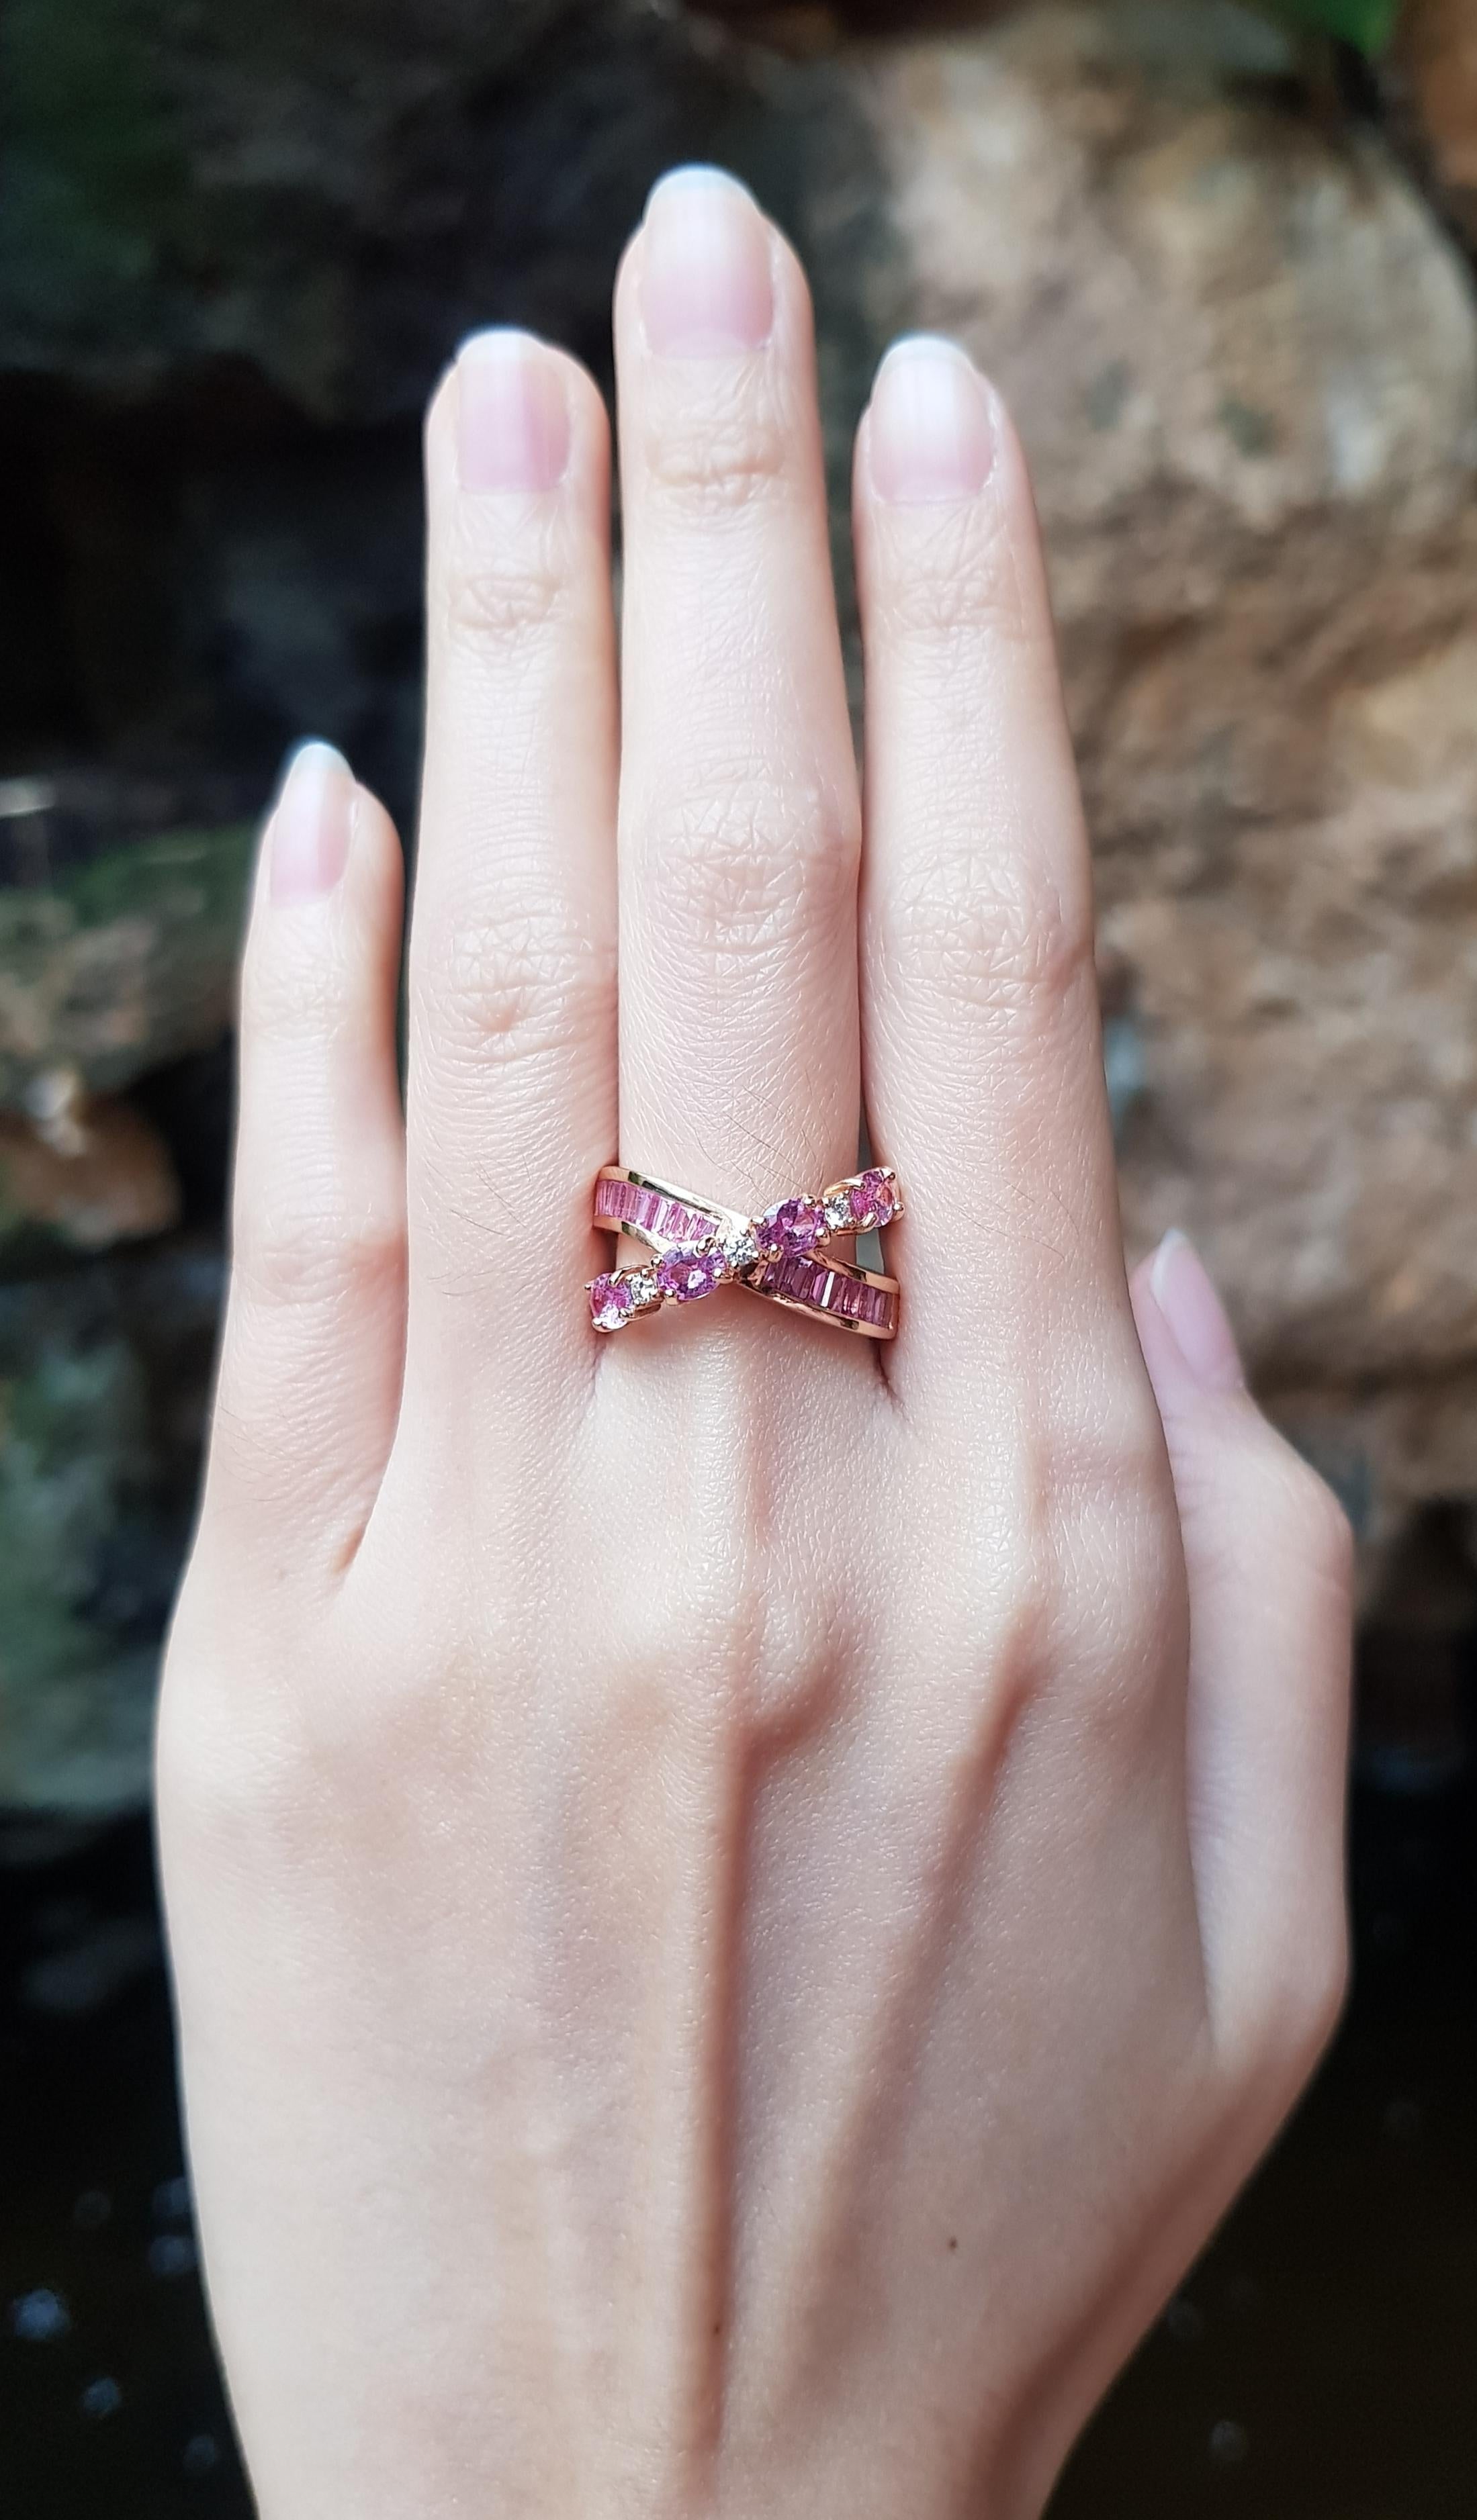 Pink Sapphire 2.88 carats with Diamond 0.03 carat Ring set in 18 Karat Rose Gold Settings

Width:  1.9 cm 
Length: 1.2 cm
Ring Size: 54
Total Weight: 7.81 grams


